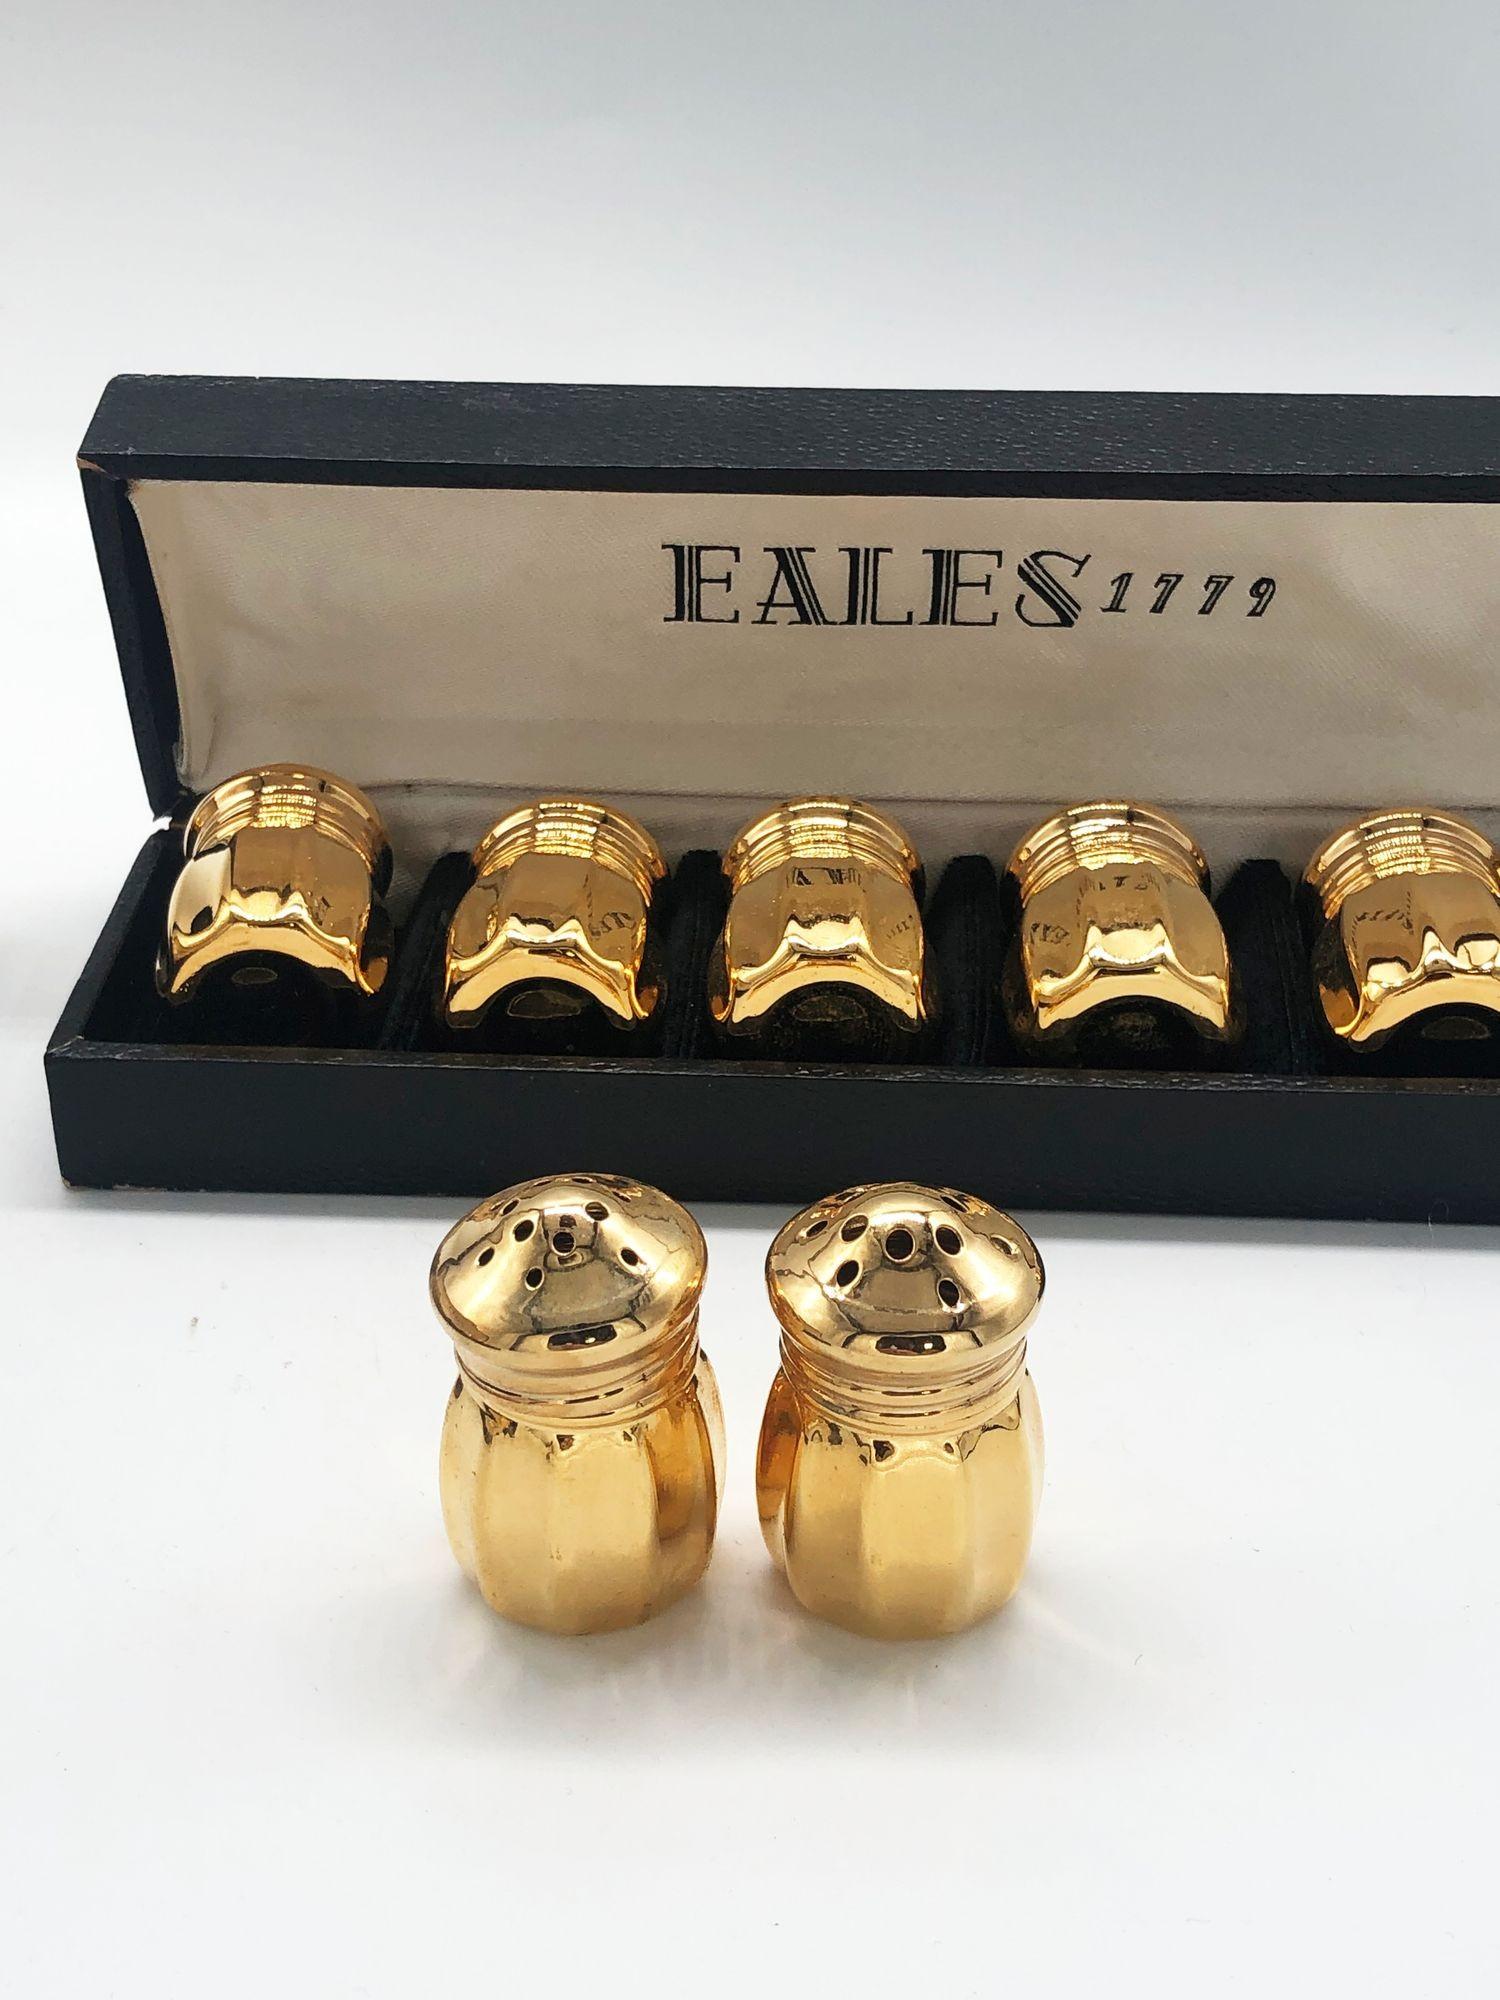 eales 1779 salt and pepper shakers